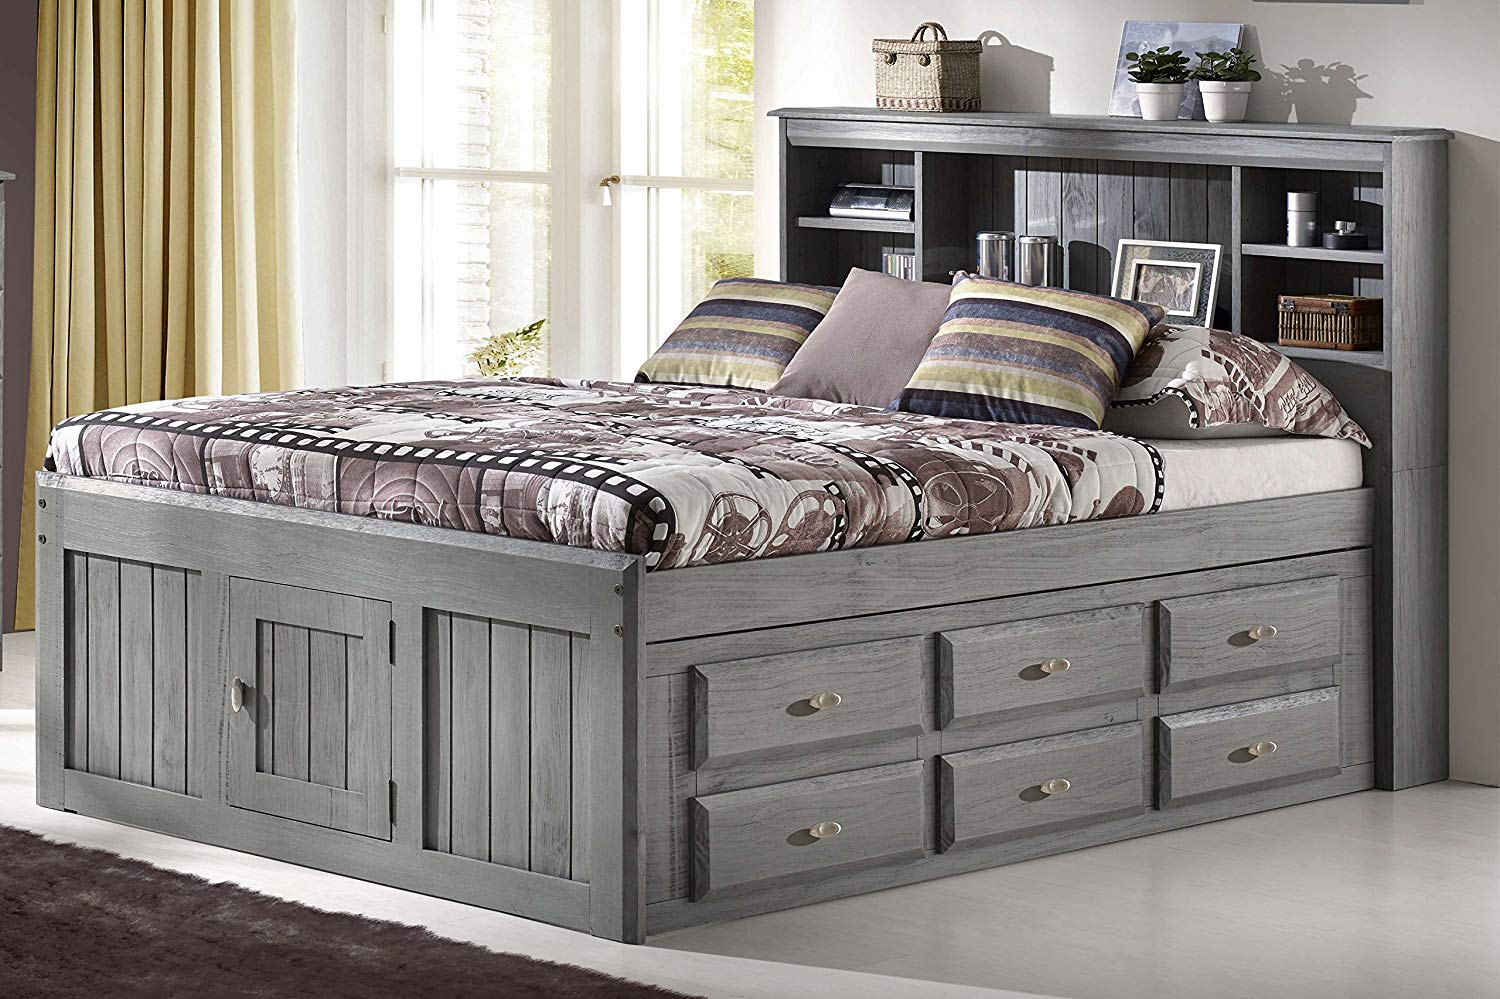 Captain bed with bookcase headboard